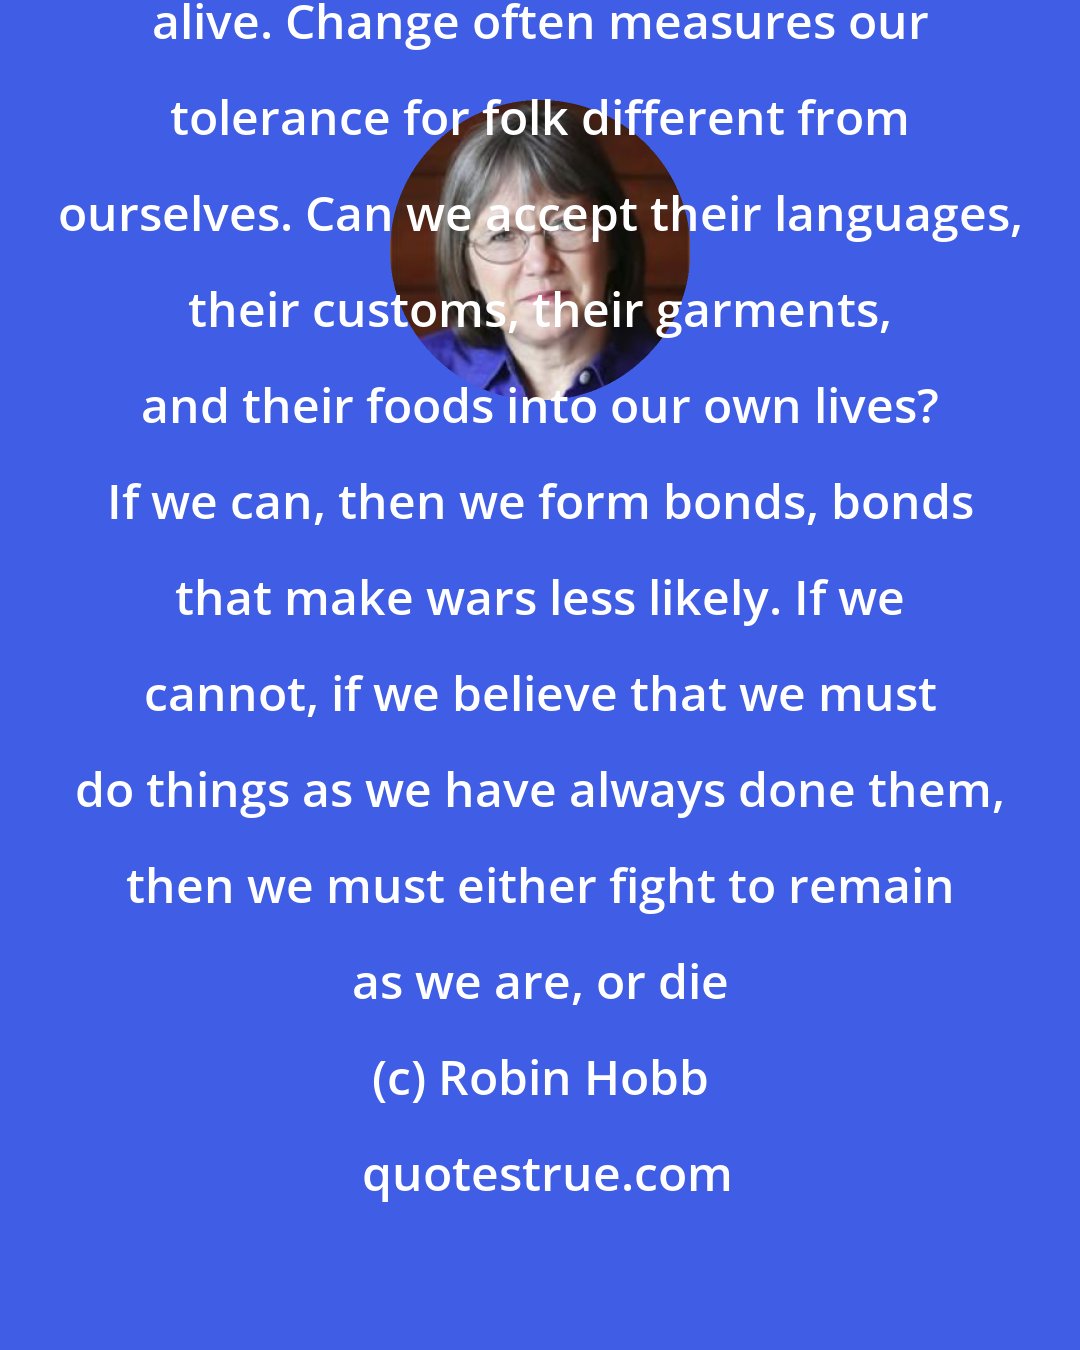 Robin Hobb: But change proves that you are still alive. Change often measures our tolerance for folk different from ourselves. Can we accept their languages, their customs, their garments, and their foods into our own lives? If we can, then we form bonds, bonds that make wars less likely. If we cannot, if we believe that we must do things as we have always done them, then we must either fight to remain as we are, or die